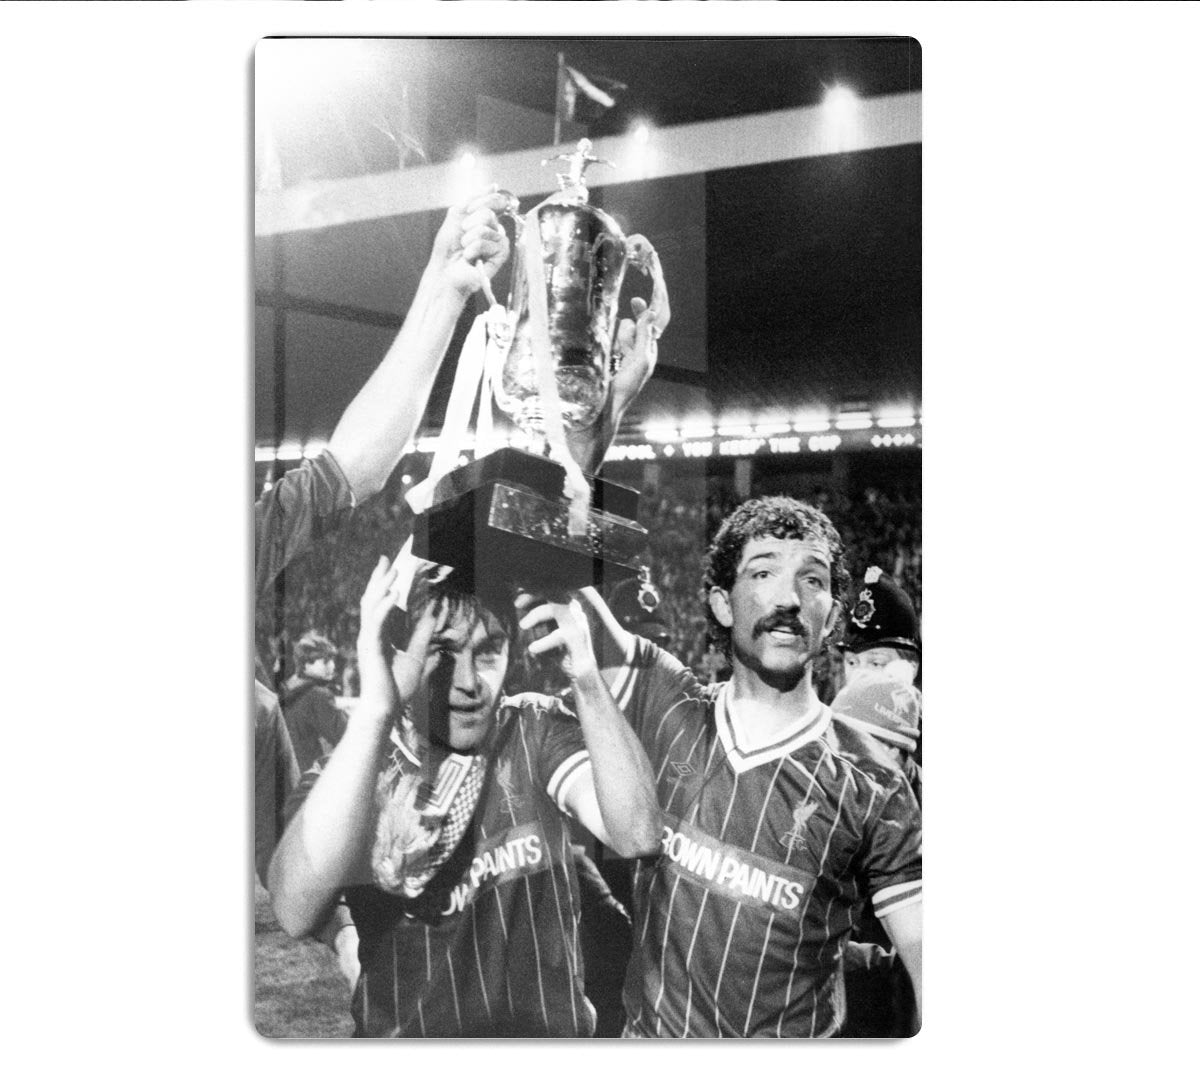 Kenny Dalglish and Graeme Souness with the Milk Cup trophy HD Metal Print - Canvas Art Rocks - 1